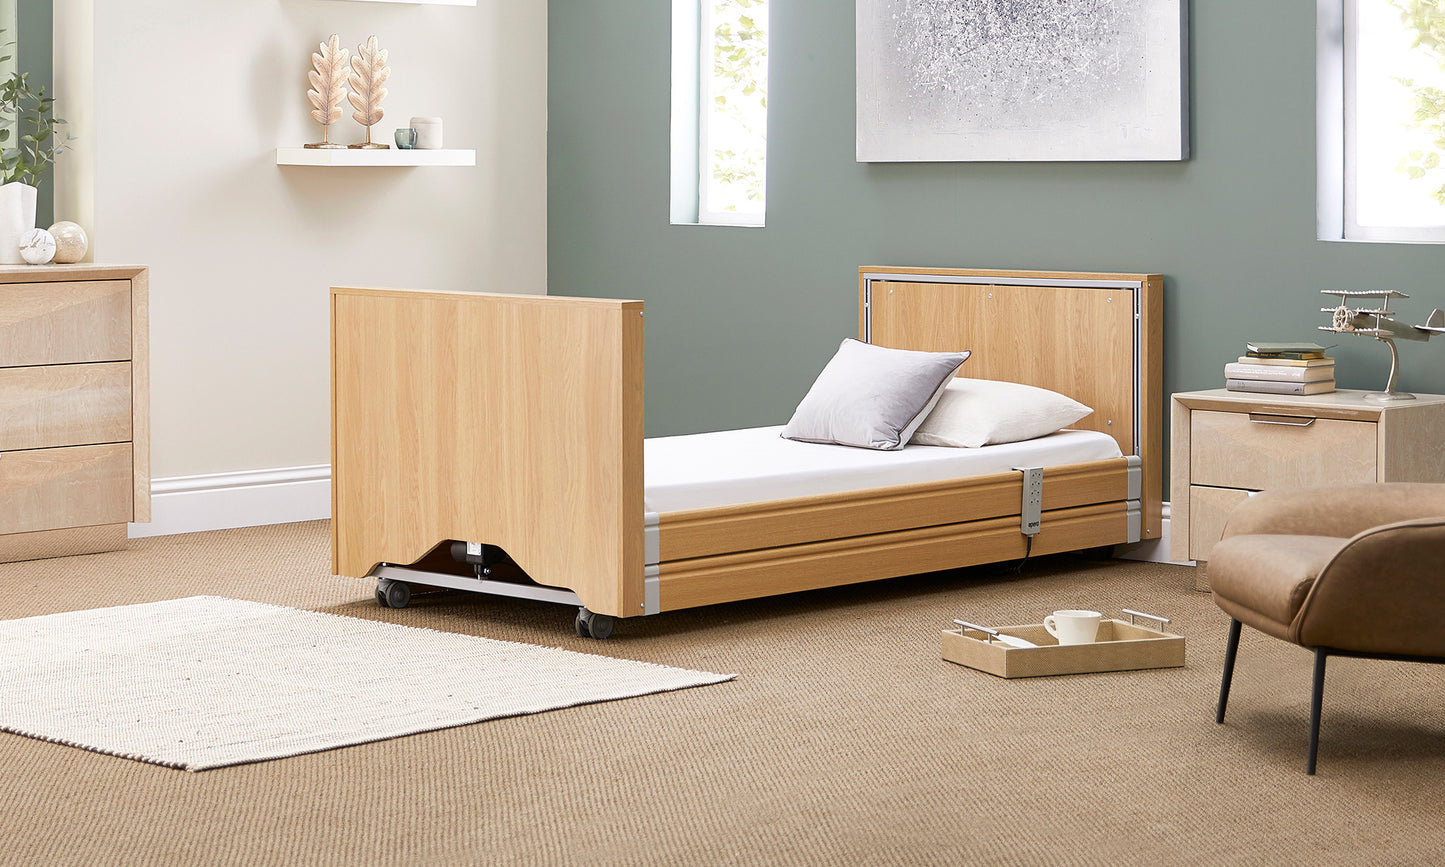 How to buy the best adjustable bed - Which?